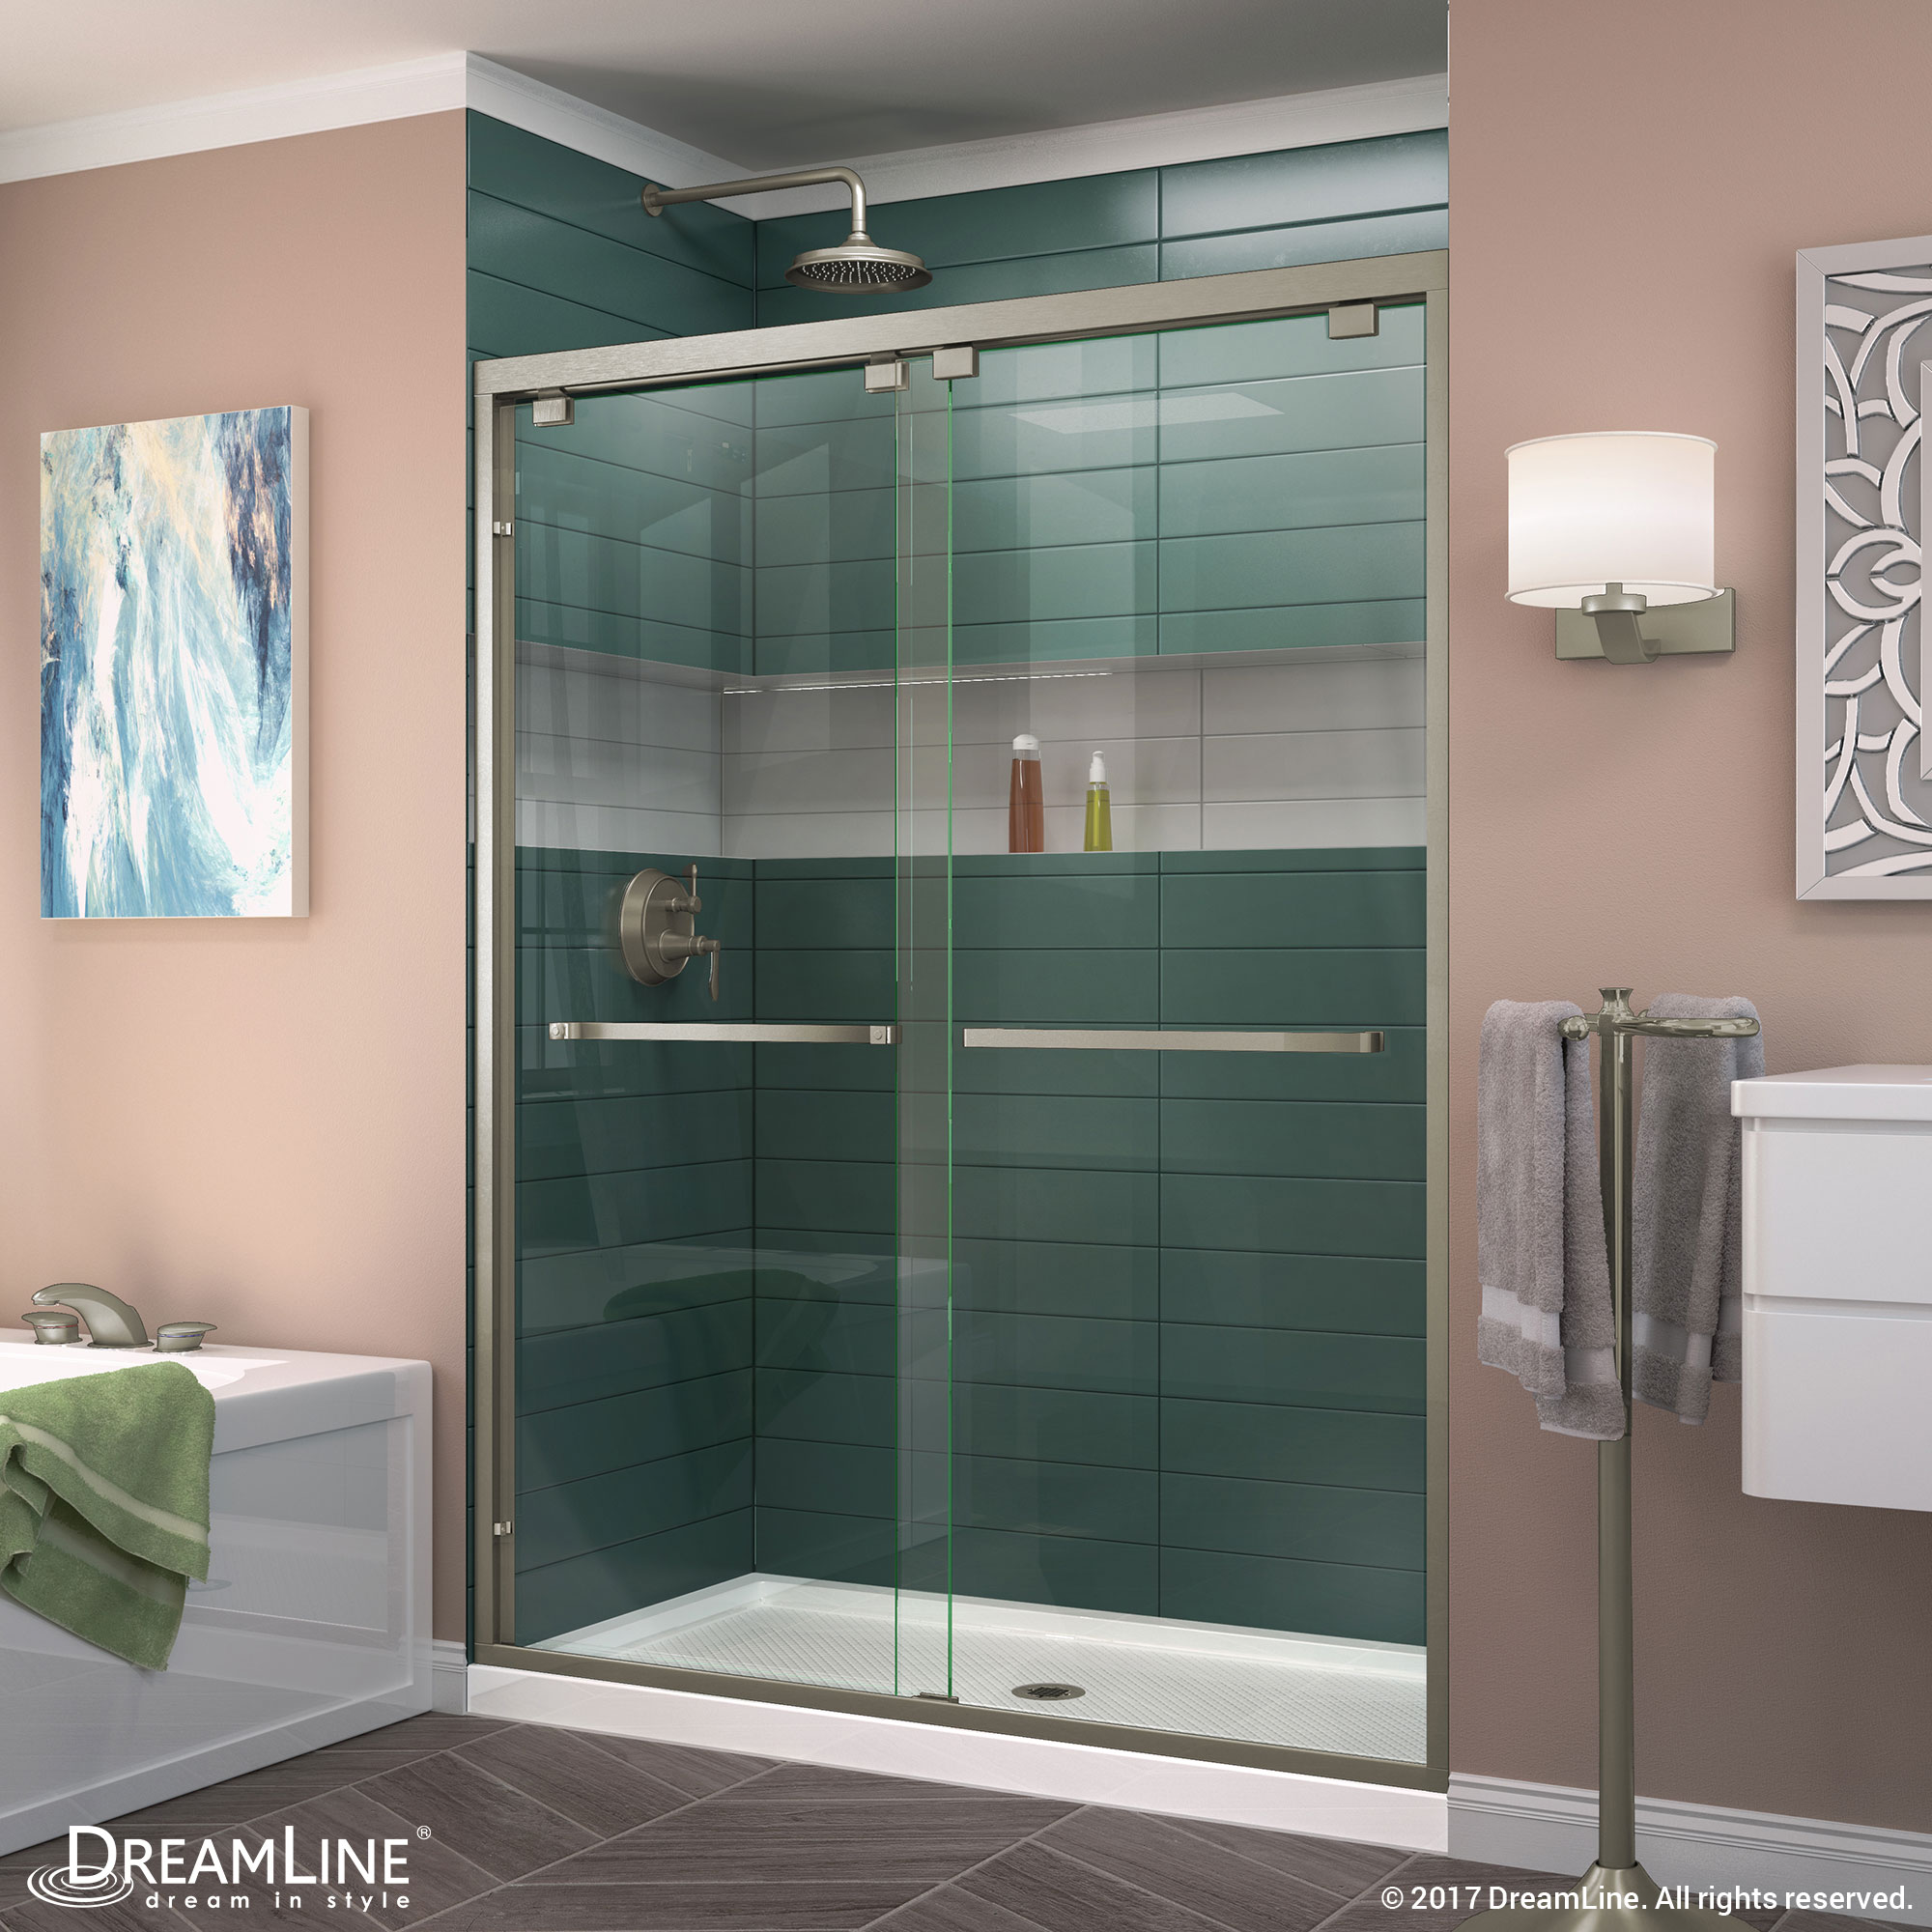 DreamLine Encore 34 in. D x 48 in. W x 78 3/4 in. H Bypass Shower Door in Chrome and Center Drain Black Base Kit